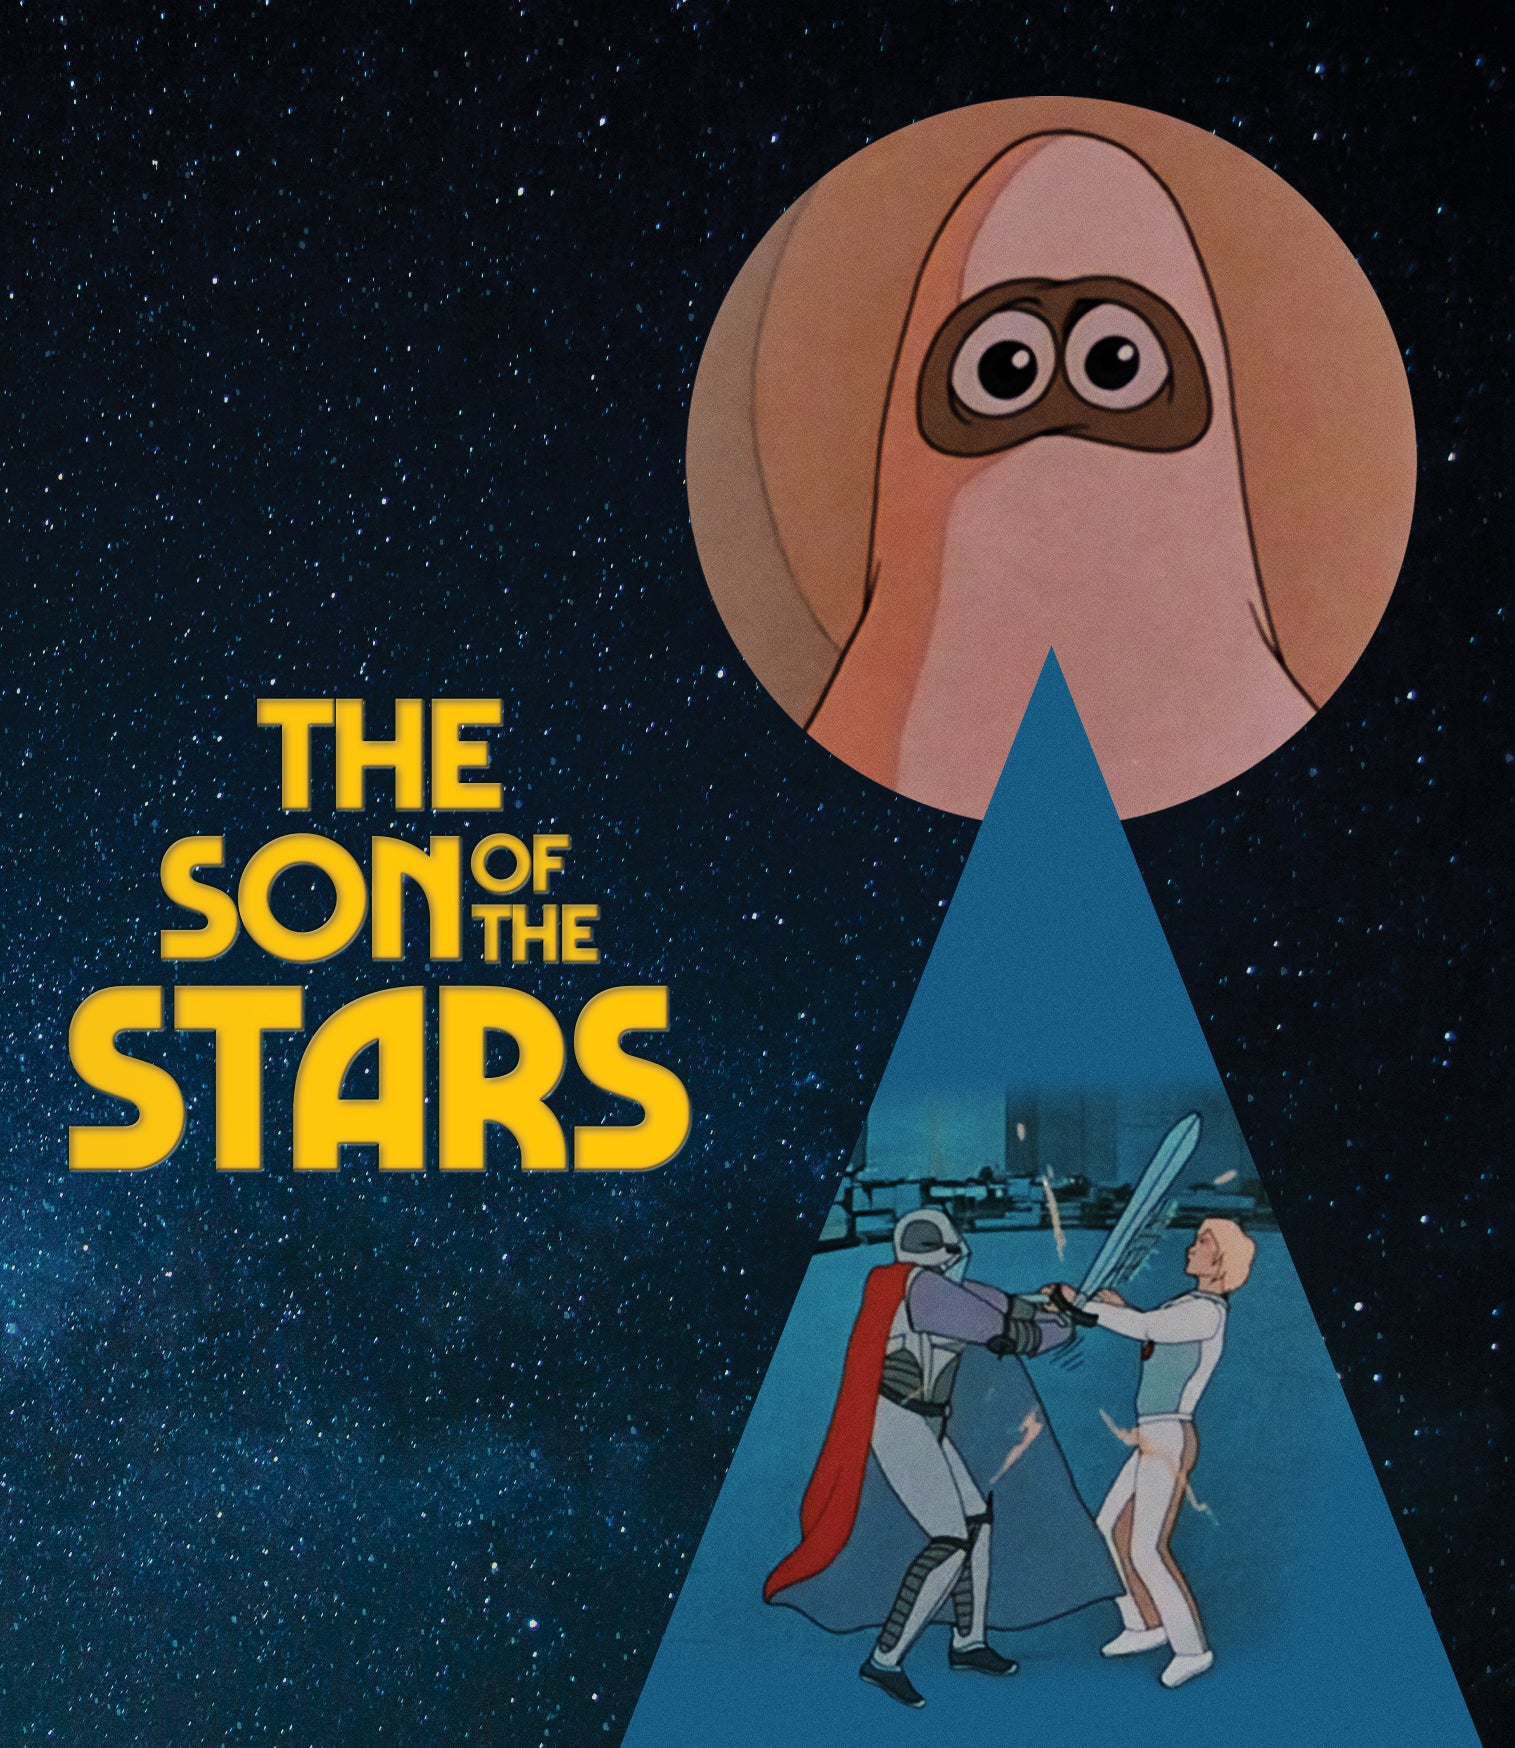 THE SON OF THE STARS (LIMITED EDITION) BLU-RAY